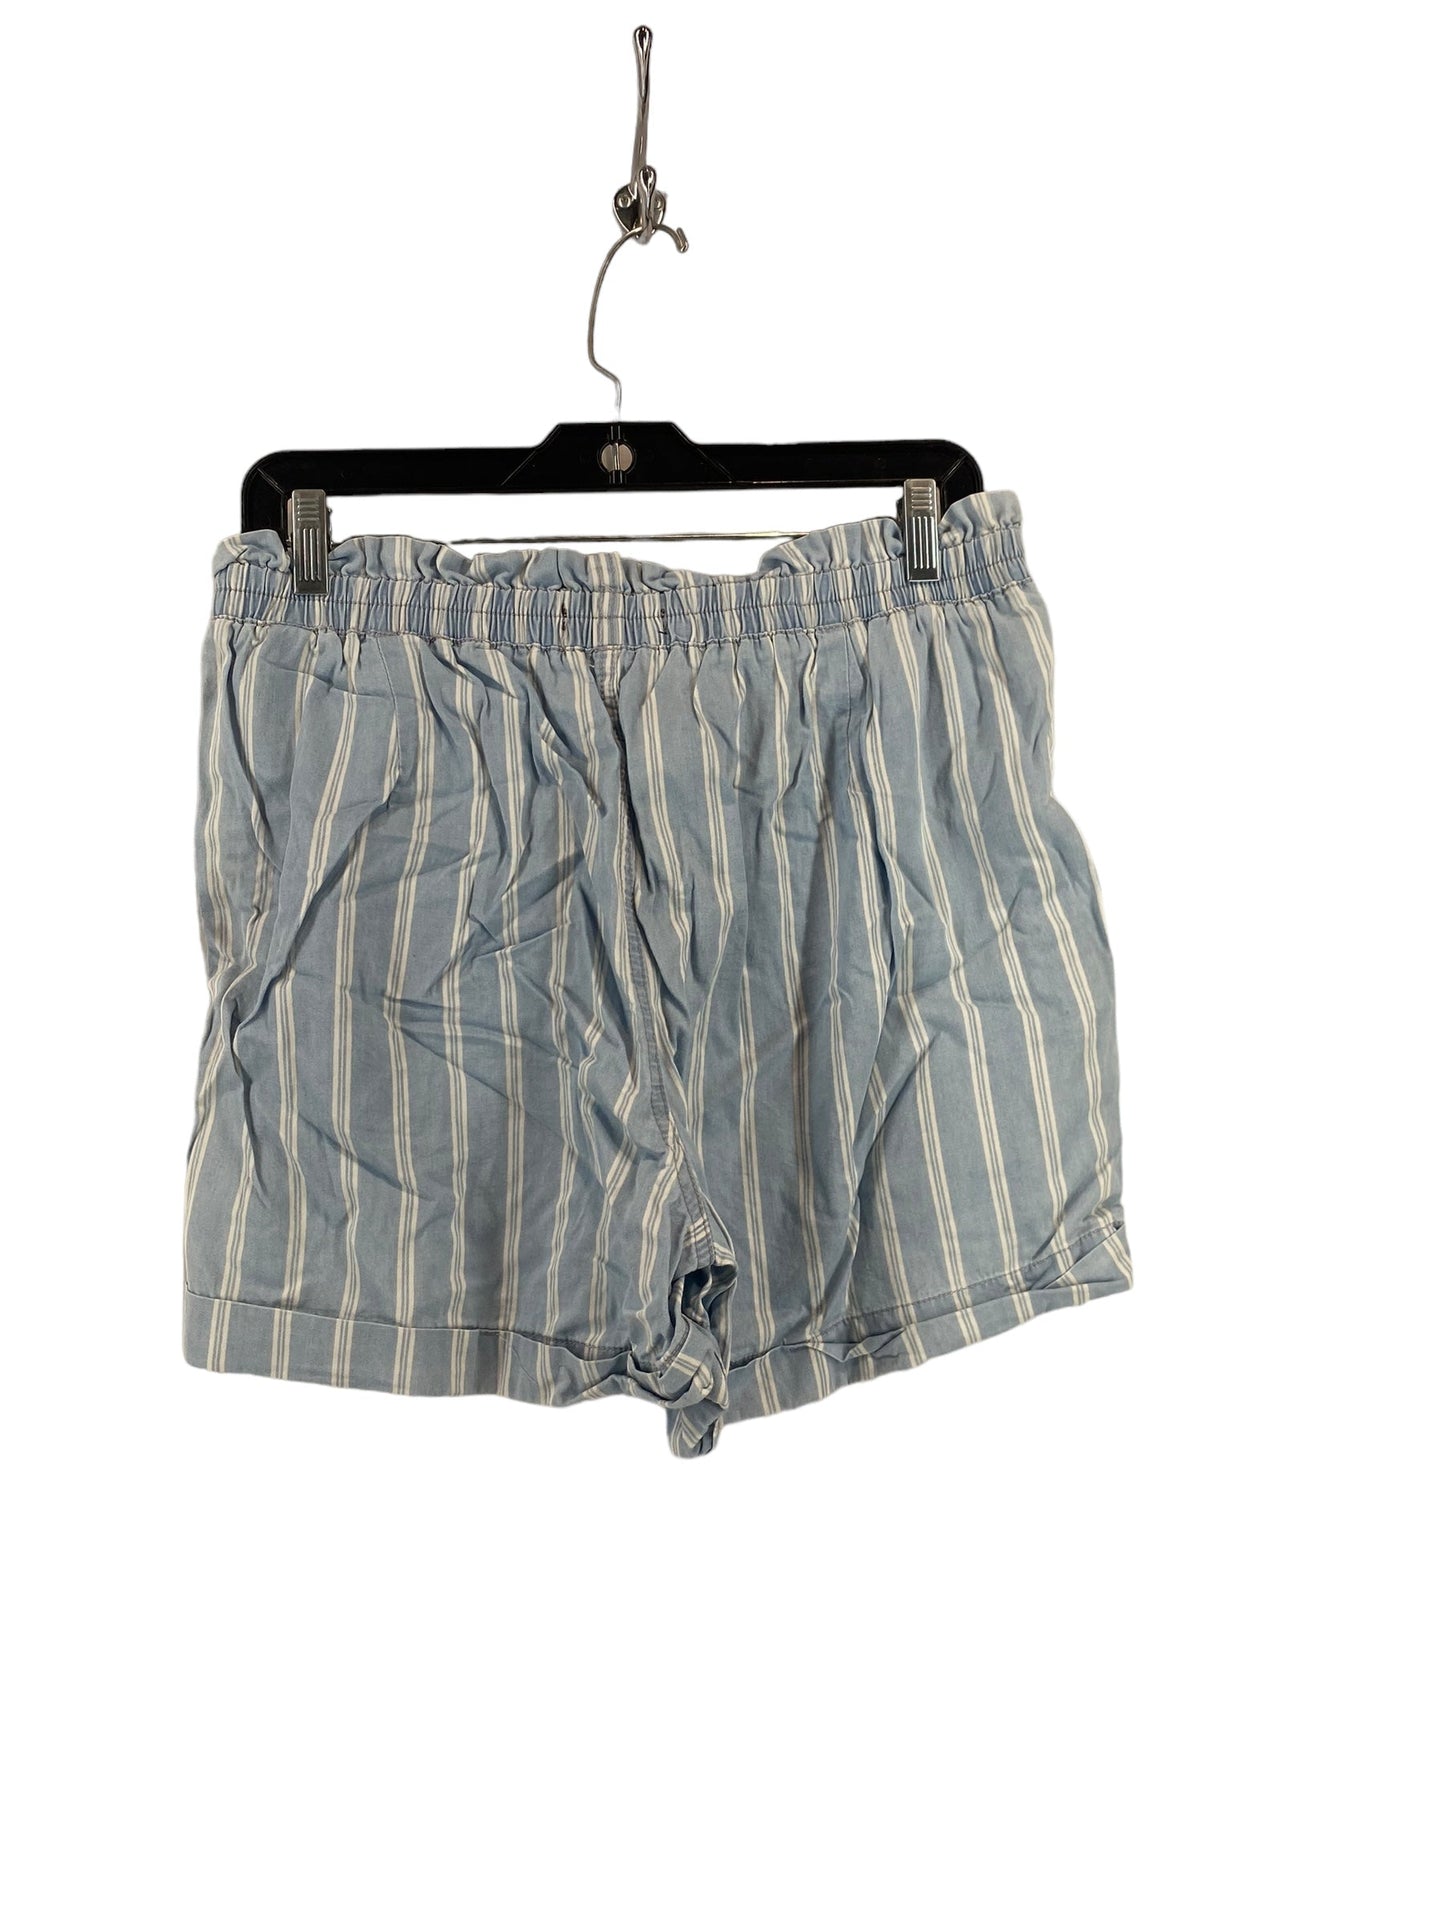 Blue Shorts One 5 One, Size M